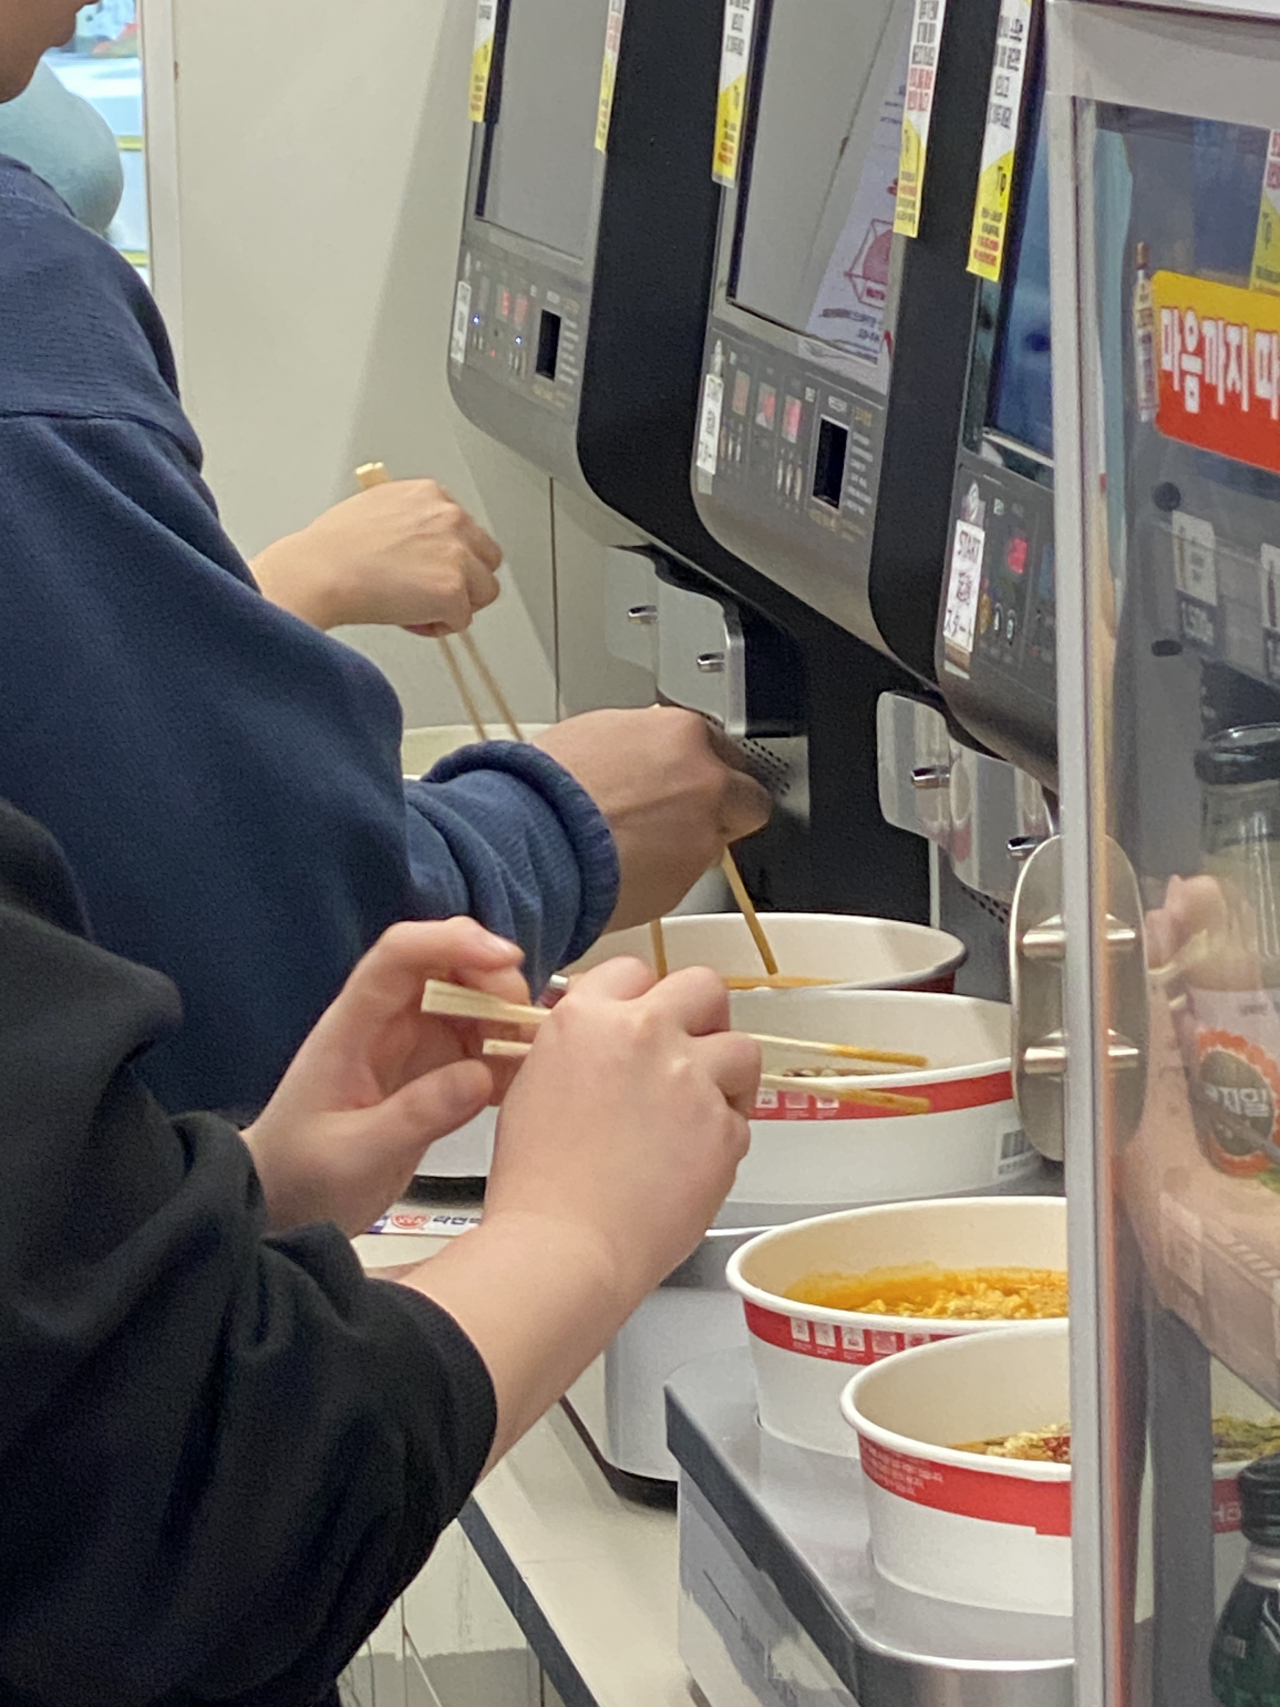 Customers cook noodles on a special machine at CU's Hongdaesangsang branch in Mapo-gu, Seoul, Thursday. (Hwang Joo-young/The Korea Herald)